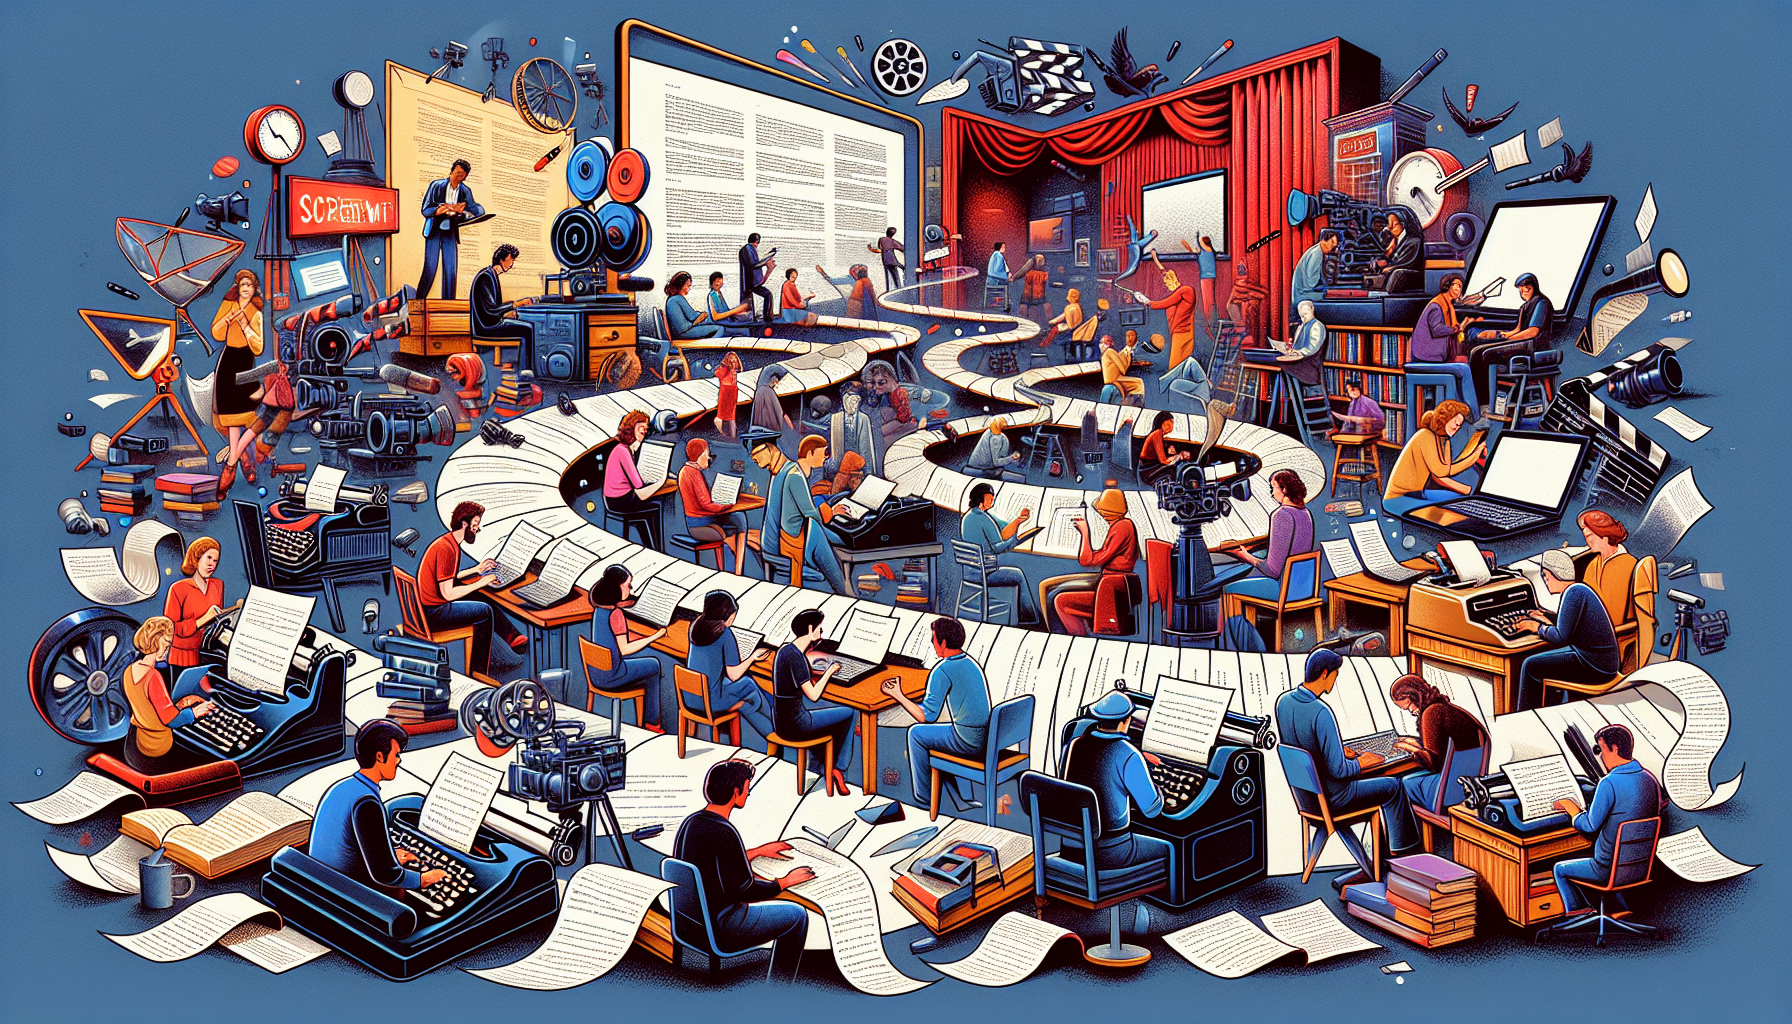 A vibrant, animated collage depicting a diverse group of people engaged in various screenwriting activities across different environments; from bustling classroom settings with large screens displayin